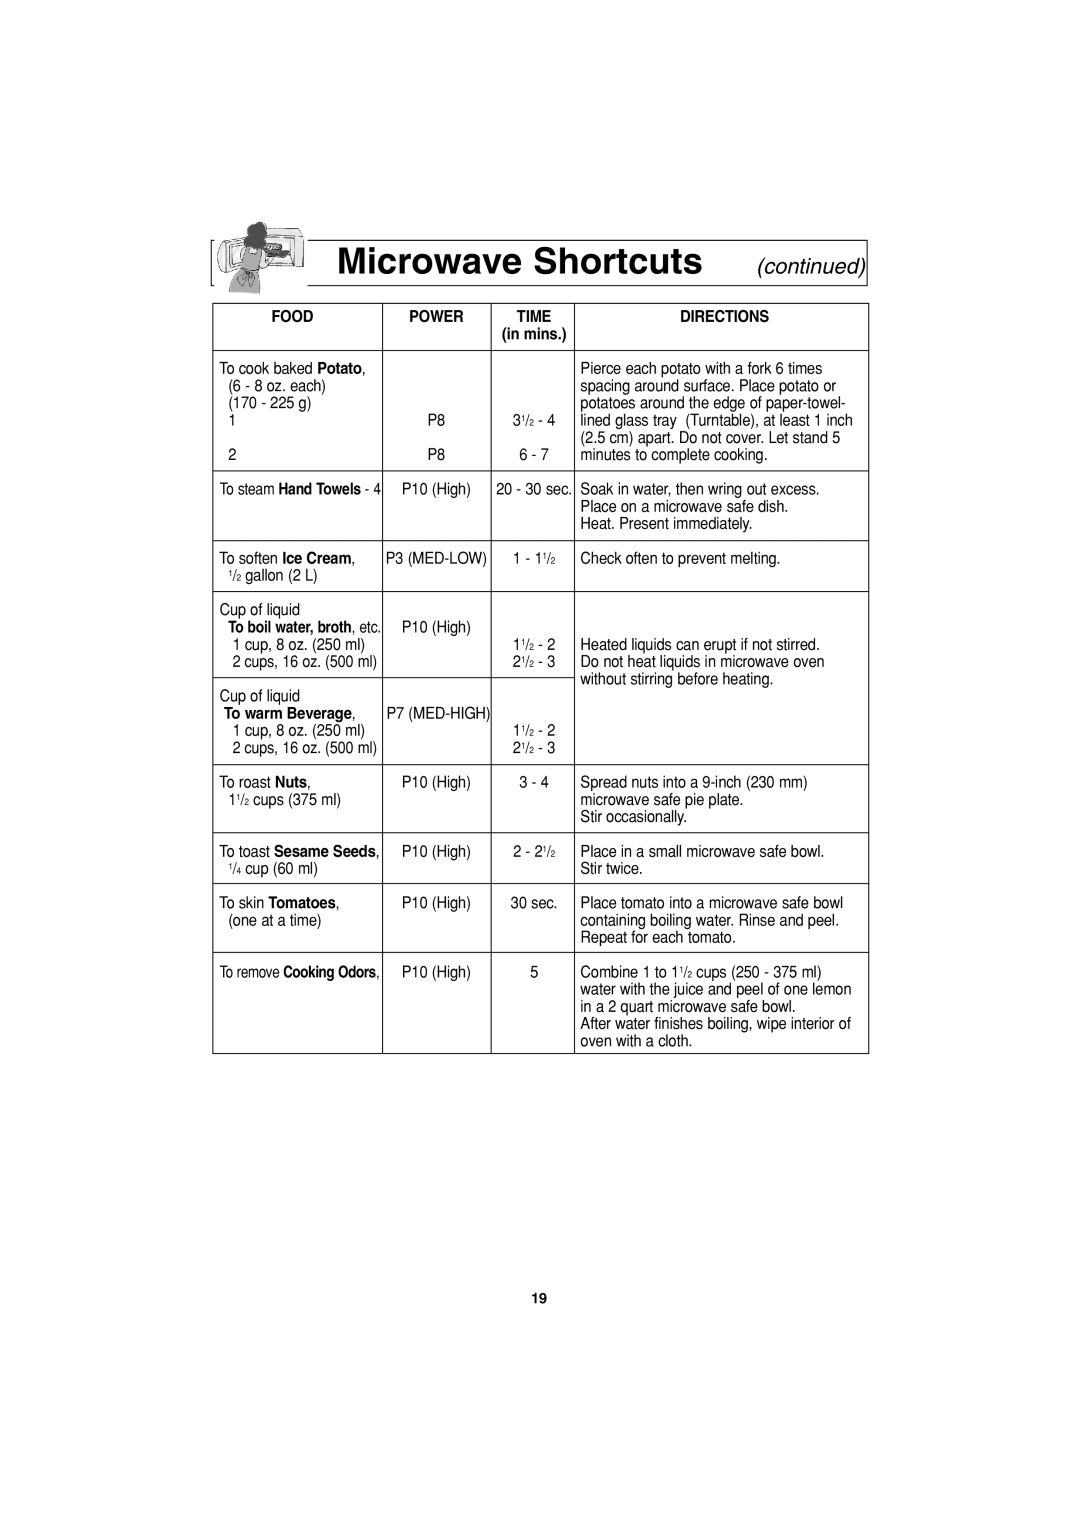 Panasonic NN-S503, NN-S553 important safety instructions Microwave Shortcuts, continued, Food, Directions, To warm Beverage 